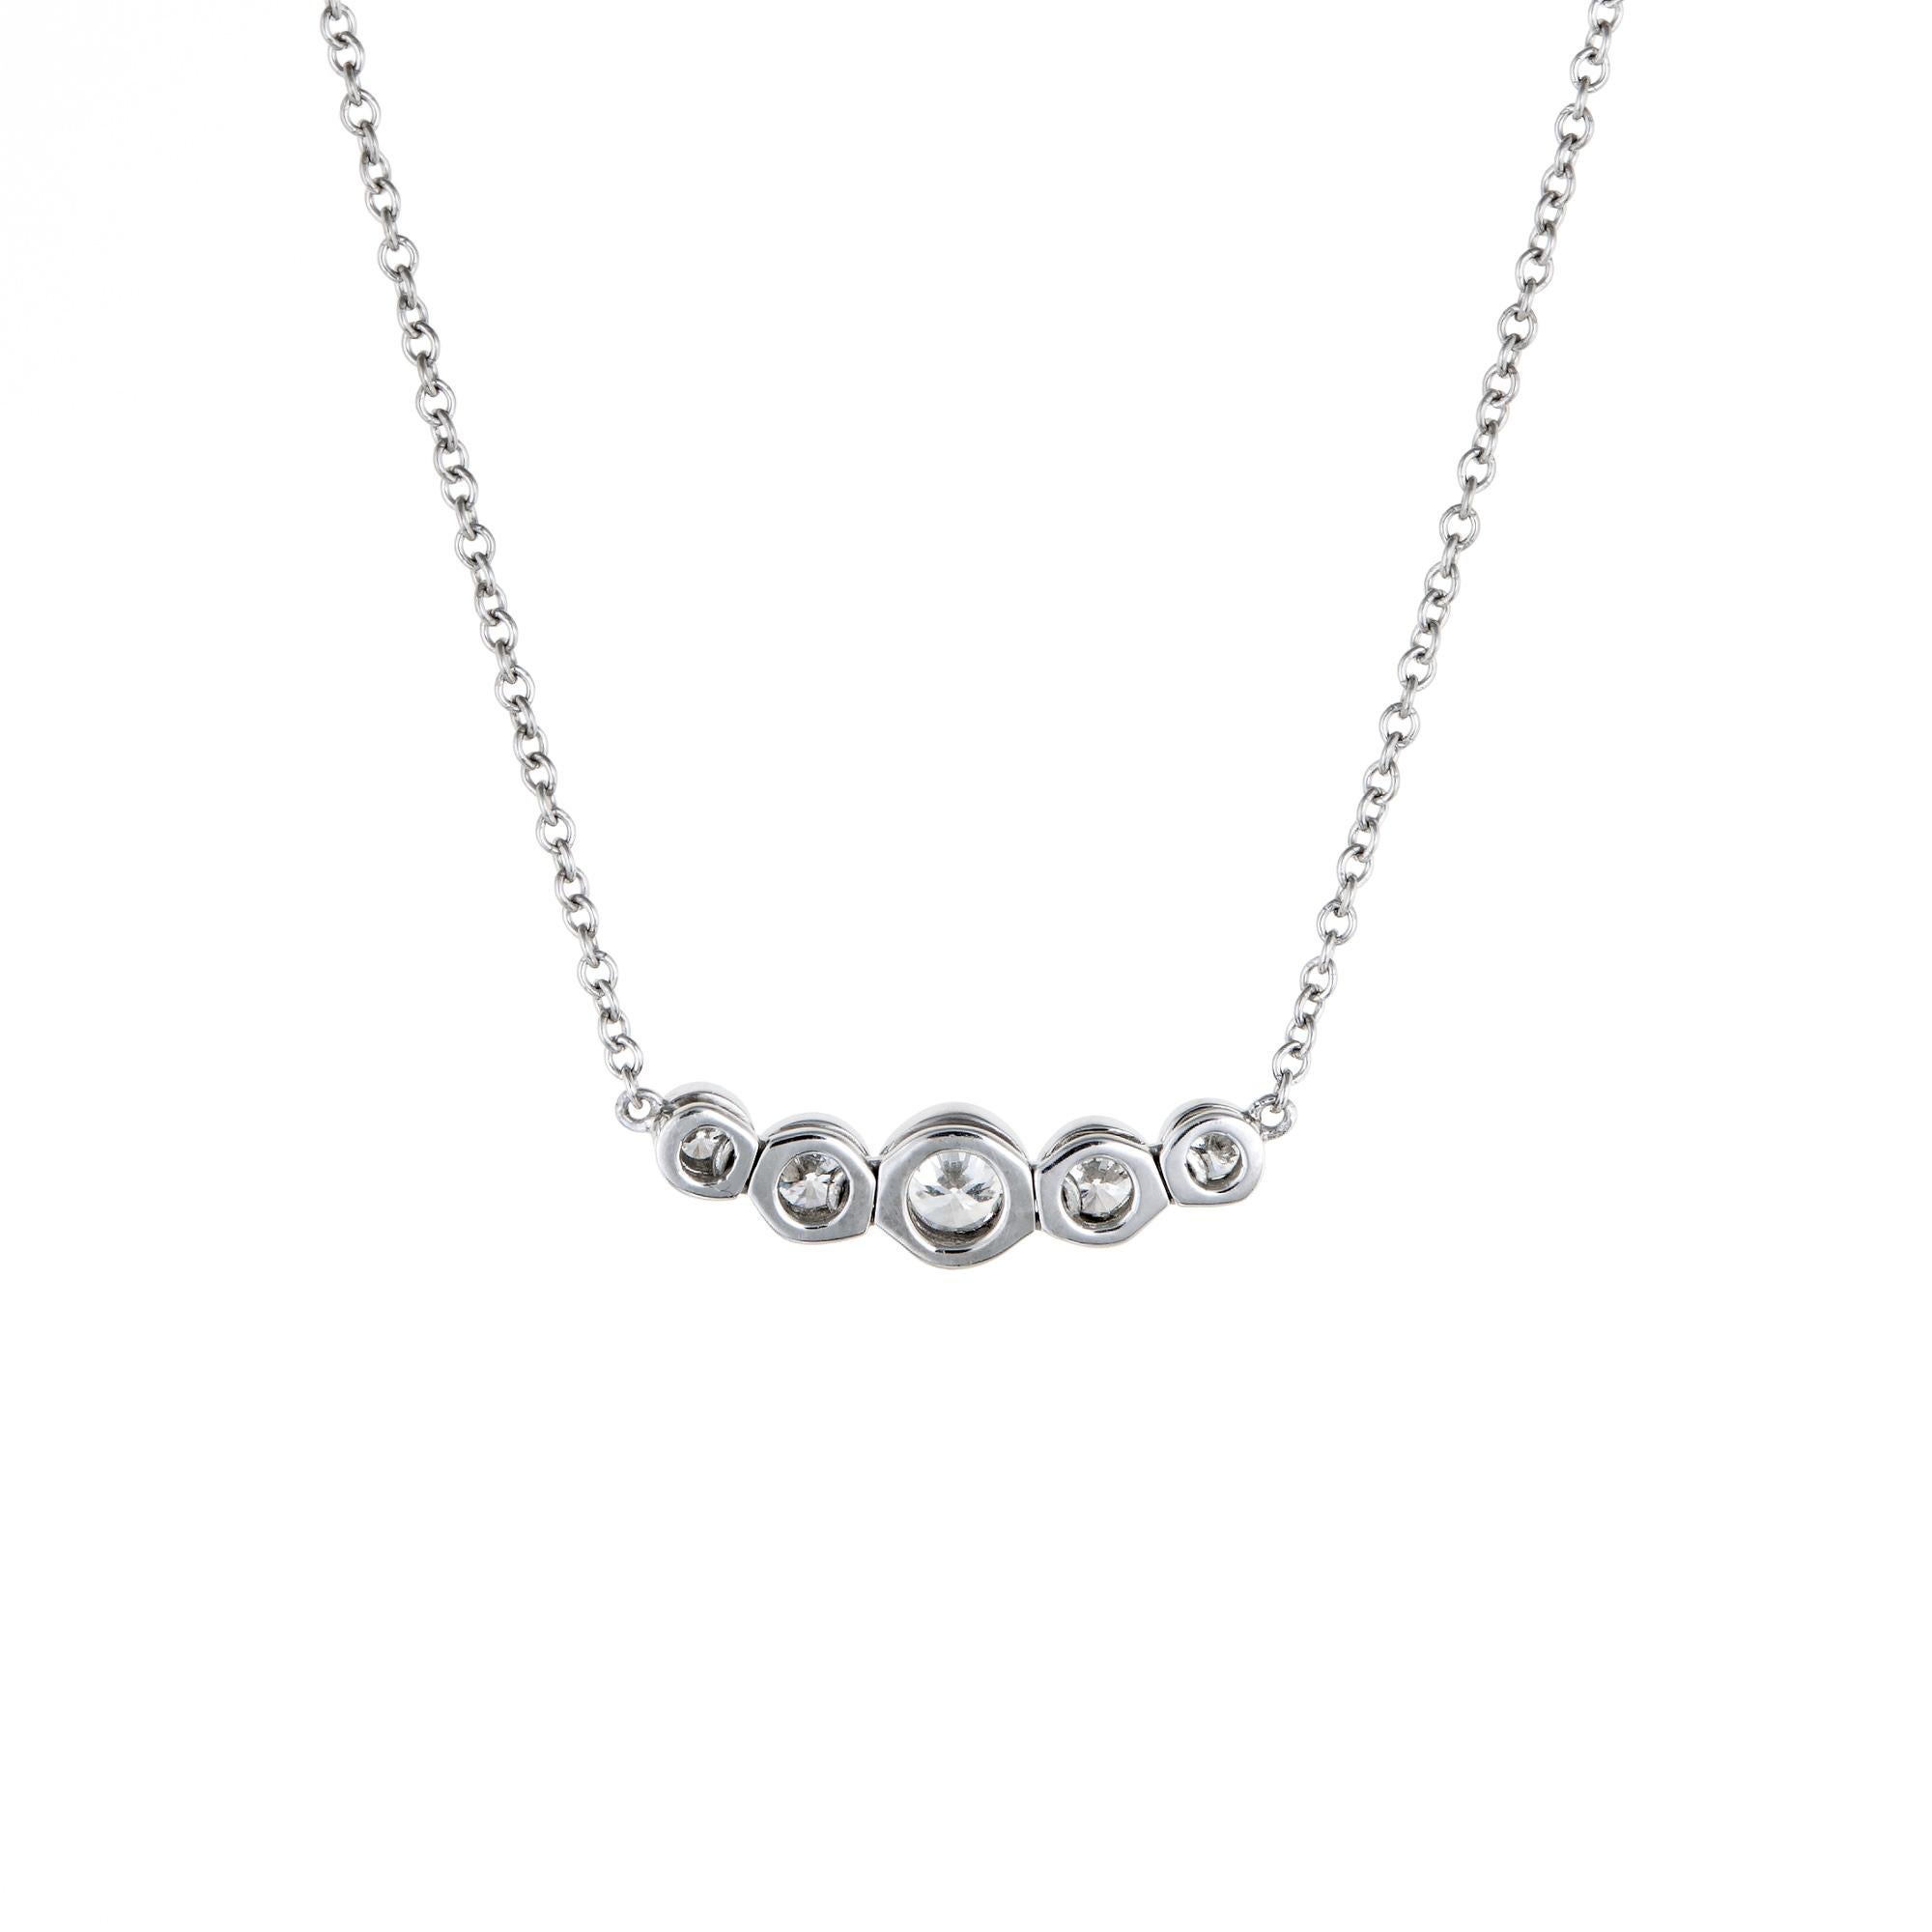 Finely detailed pre owned Tiffany & Co diamond jazz necklace, crafted in 950 platinum.  

5 round brilliant cut diamonds total an estimated 0.26 carats (estimated at F-G color and VVS2 clarity) 

The necklace is in excellent original condition and